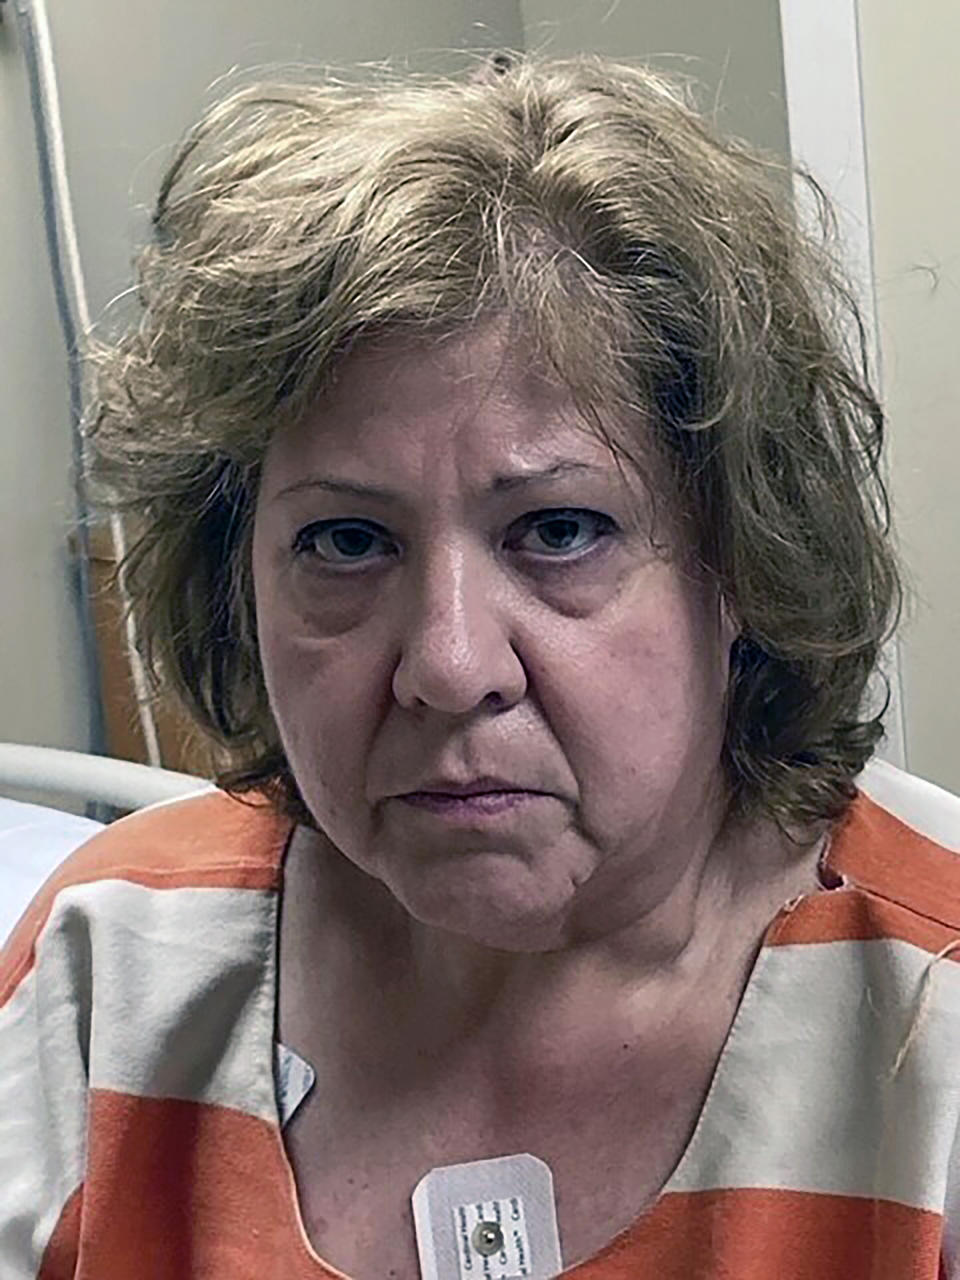 This image provided by the Marion County Sheriff’s Office shows Susan Lorincz, accused of fatally shooting her neighbor, Ajike Owens, a Black mother of four. Lorincz was arrested Tuesday, June 6, 2023. (Marion County Sheriff’s Office via AP)